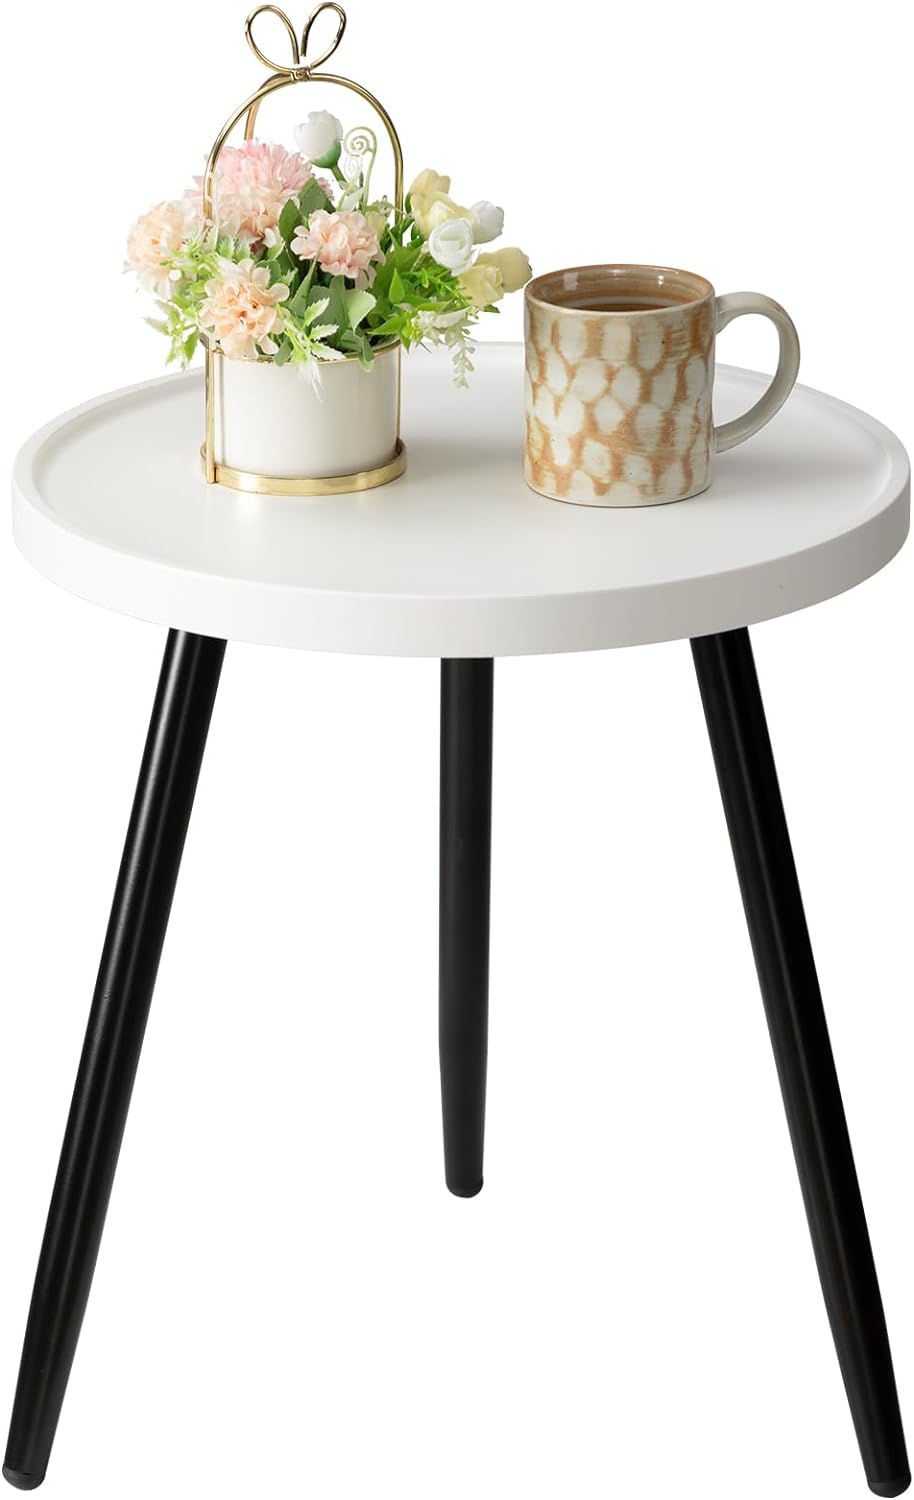 danpinera Round Side Table, Metal Legged Accent Table with Wooden Tray, Small Round End Table for Living Room, Bedroom, Nursery, White & Black